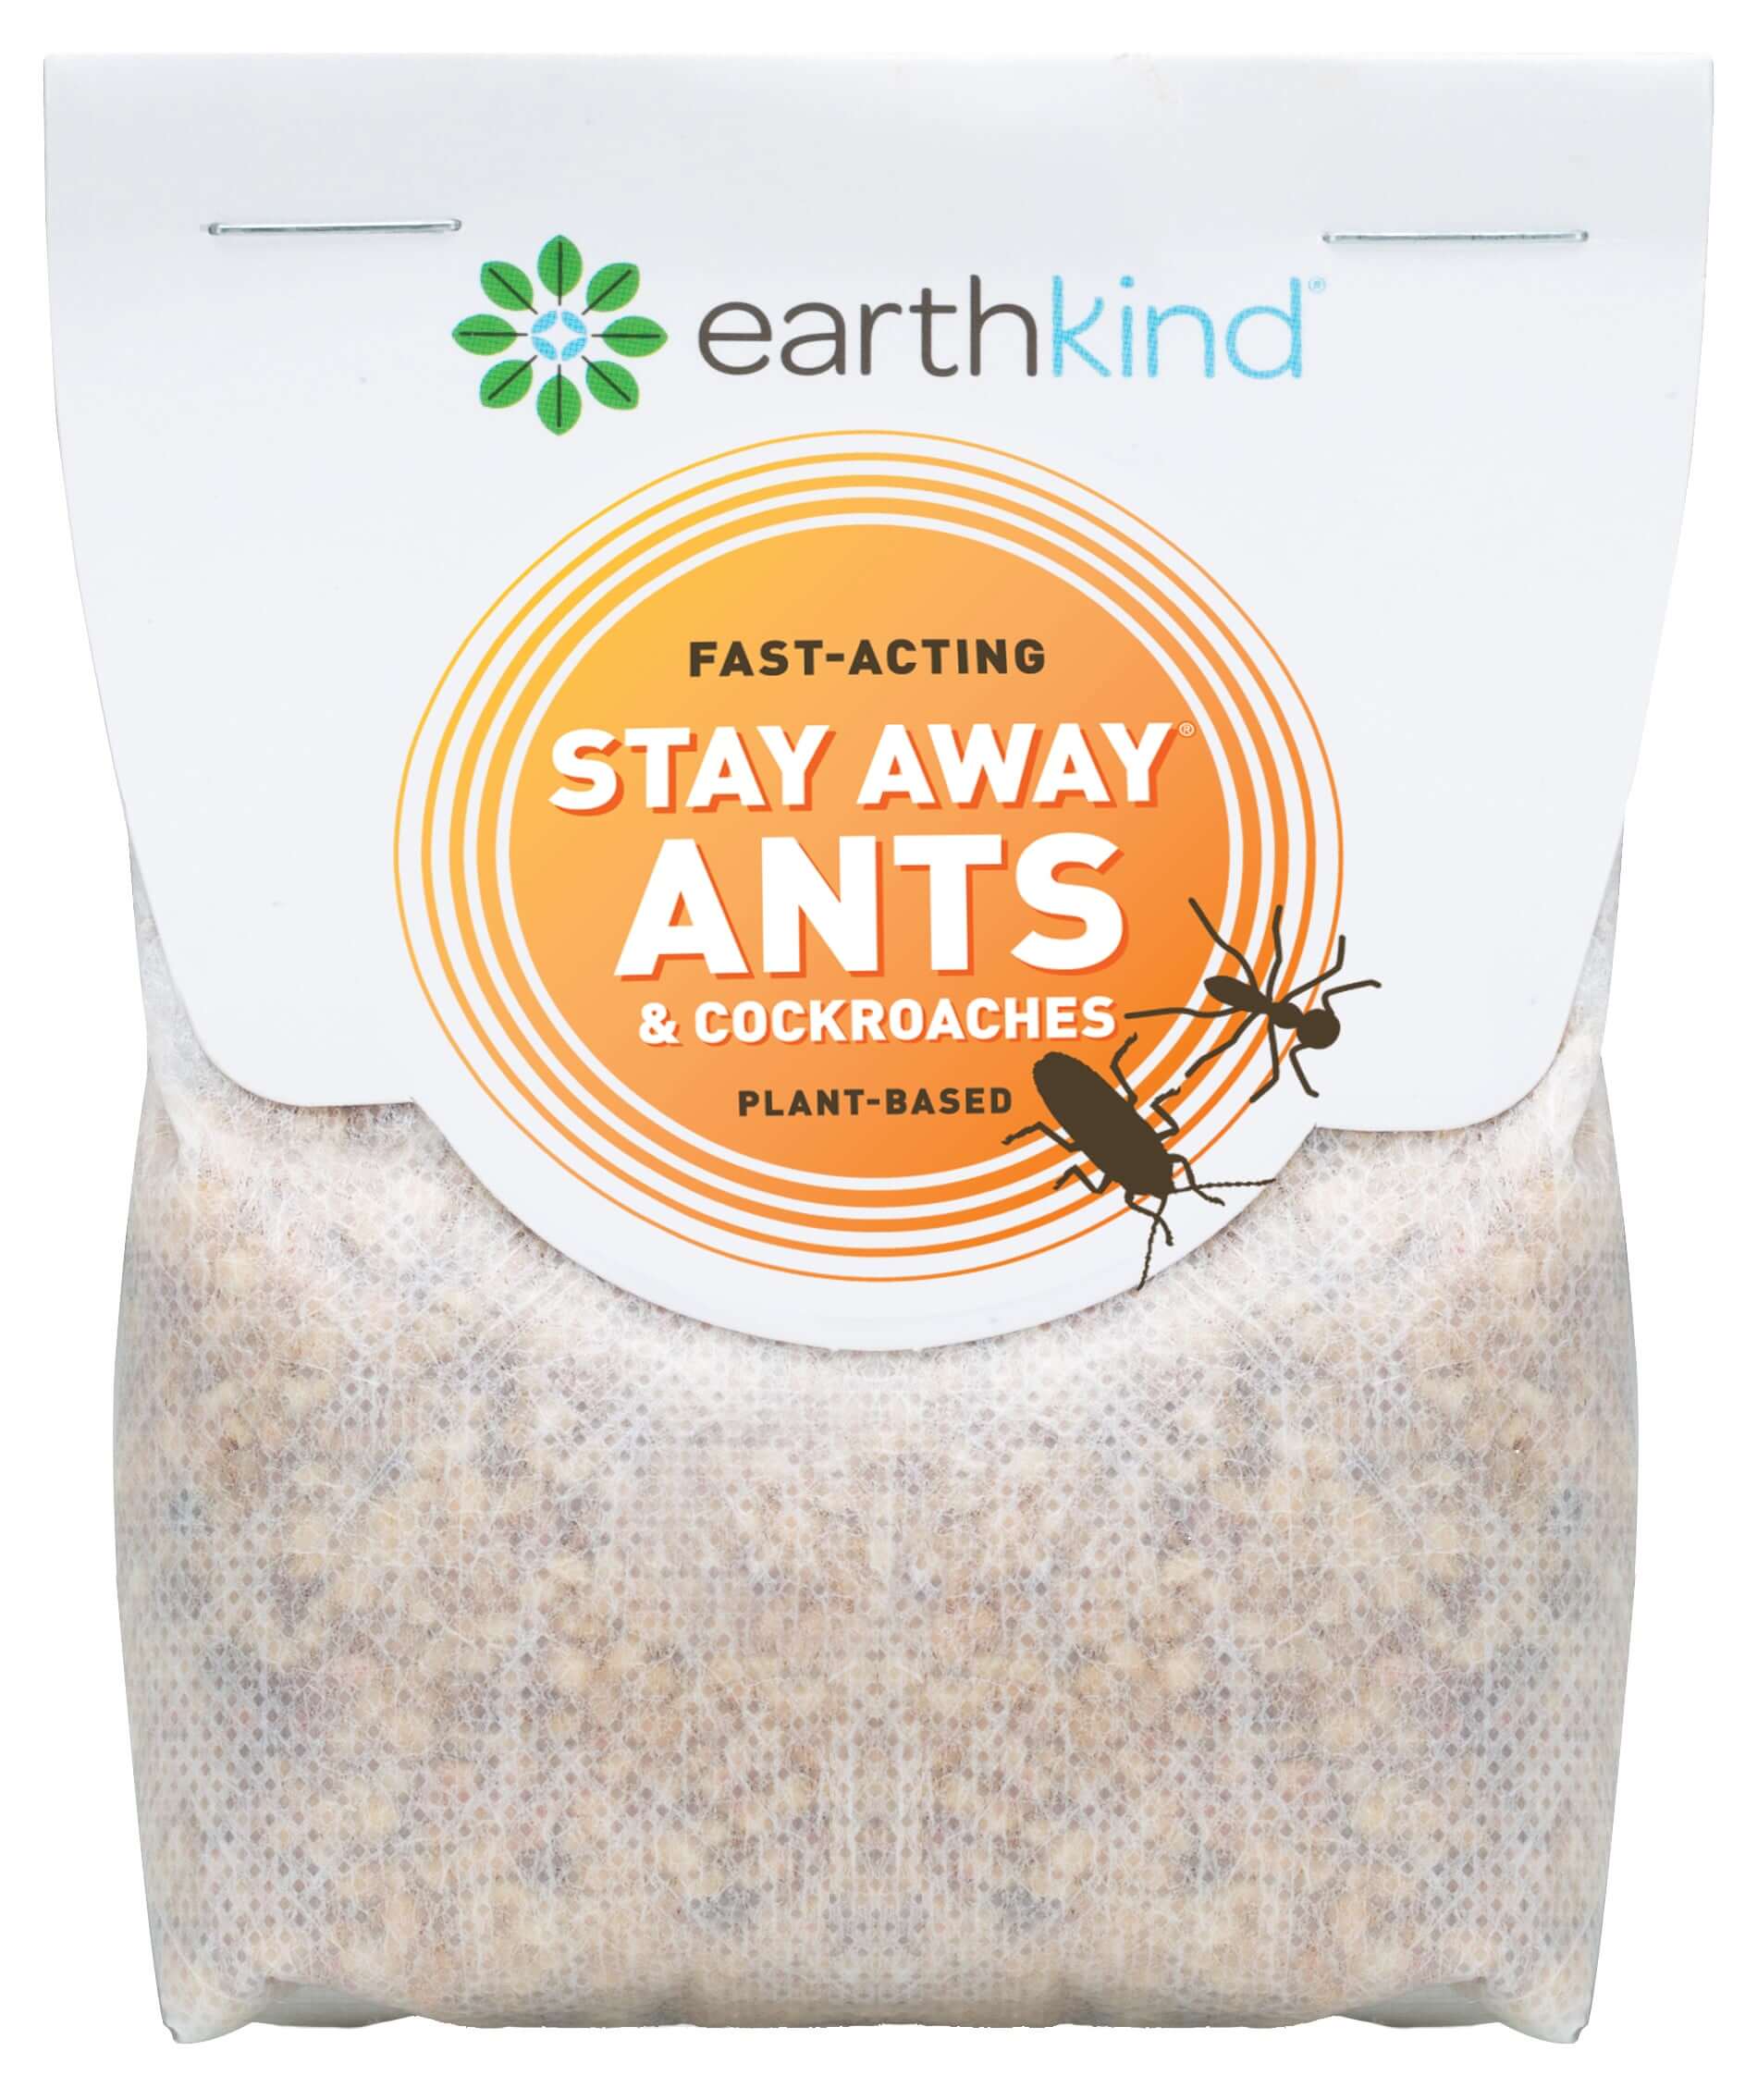 Stay Away Ants & Cockroaches pouch